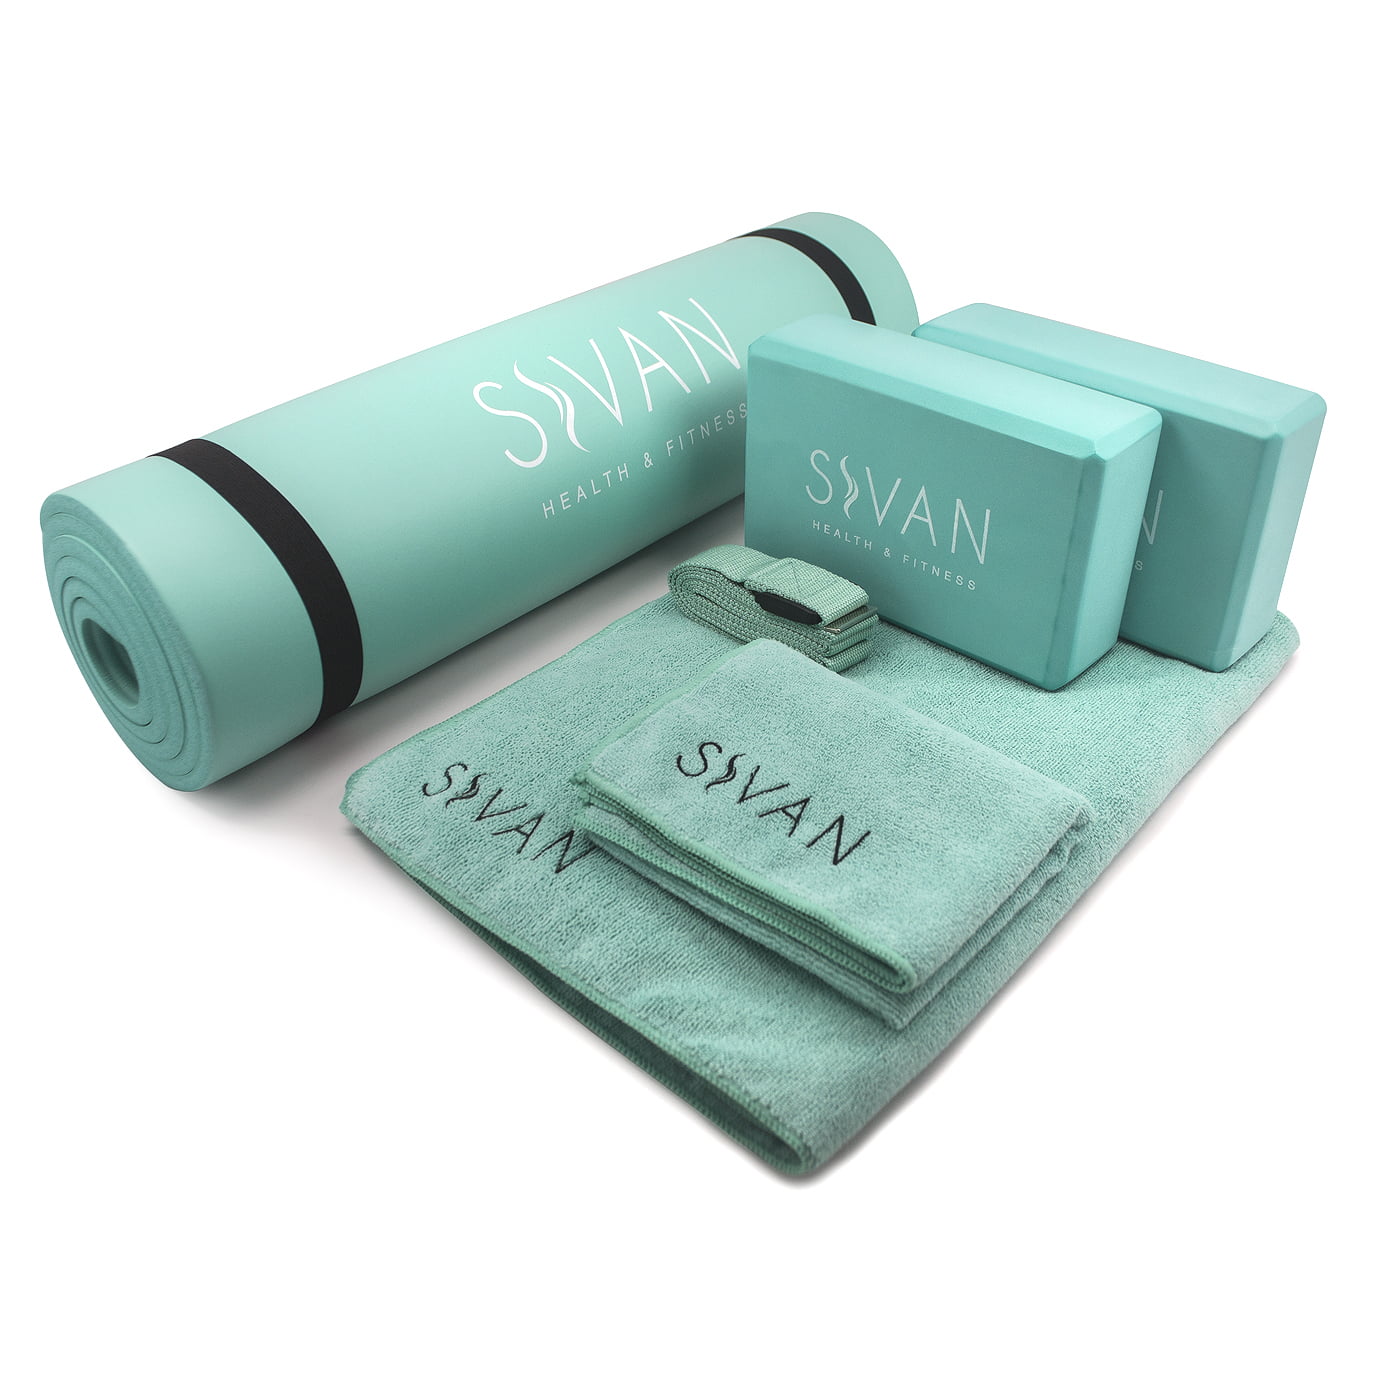 Sivan 6-Piece Yoga Set, Includes 1/2 Ultra Thick NBR Exercise Mat